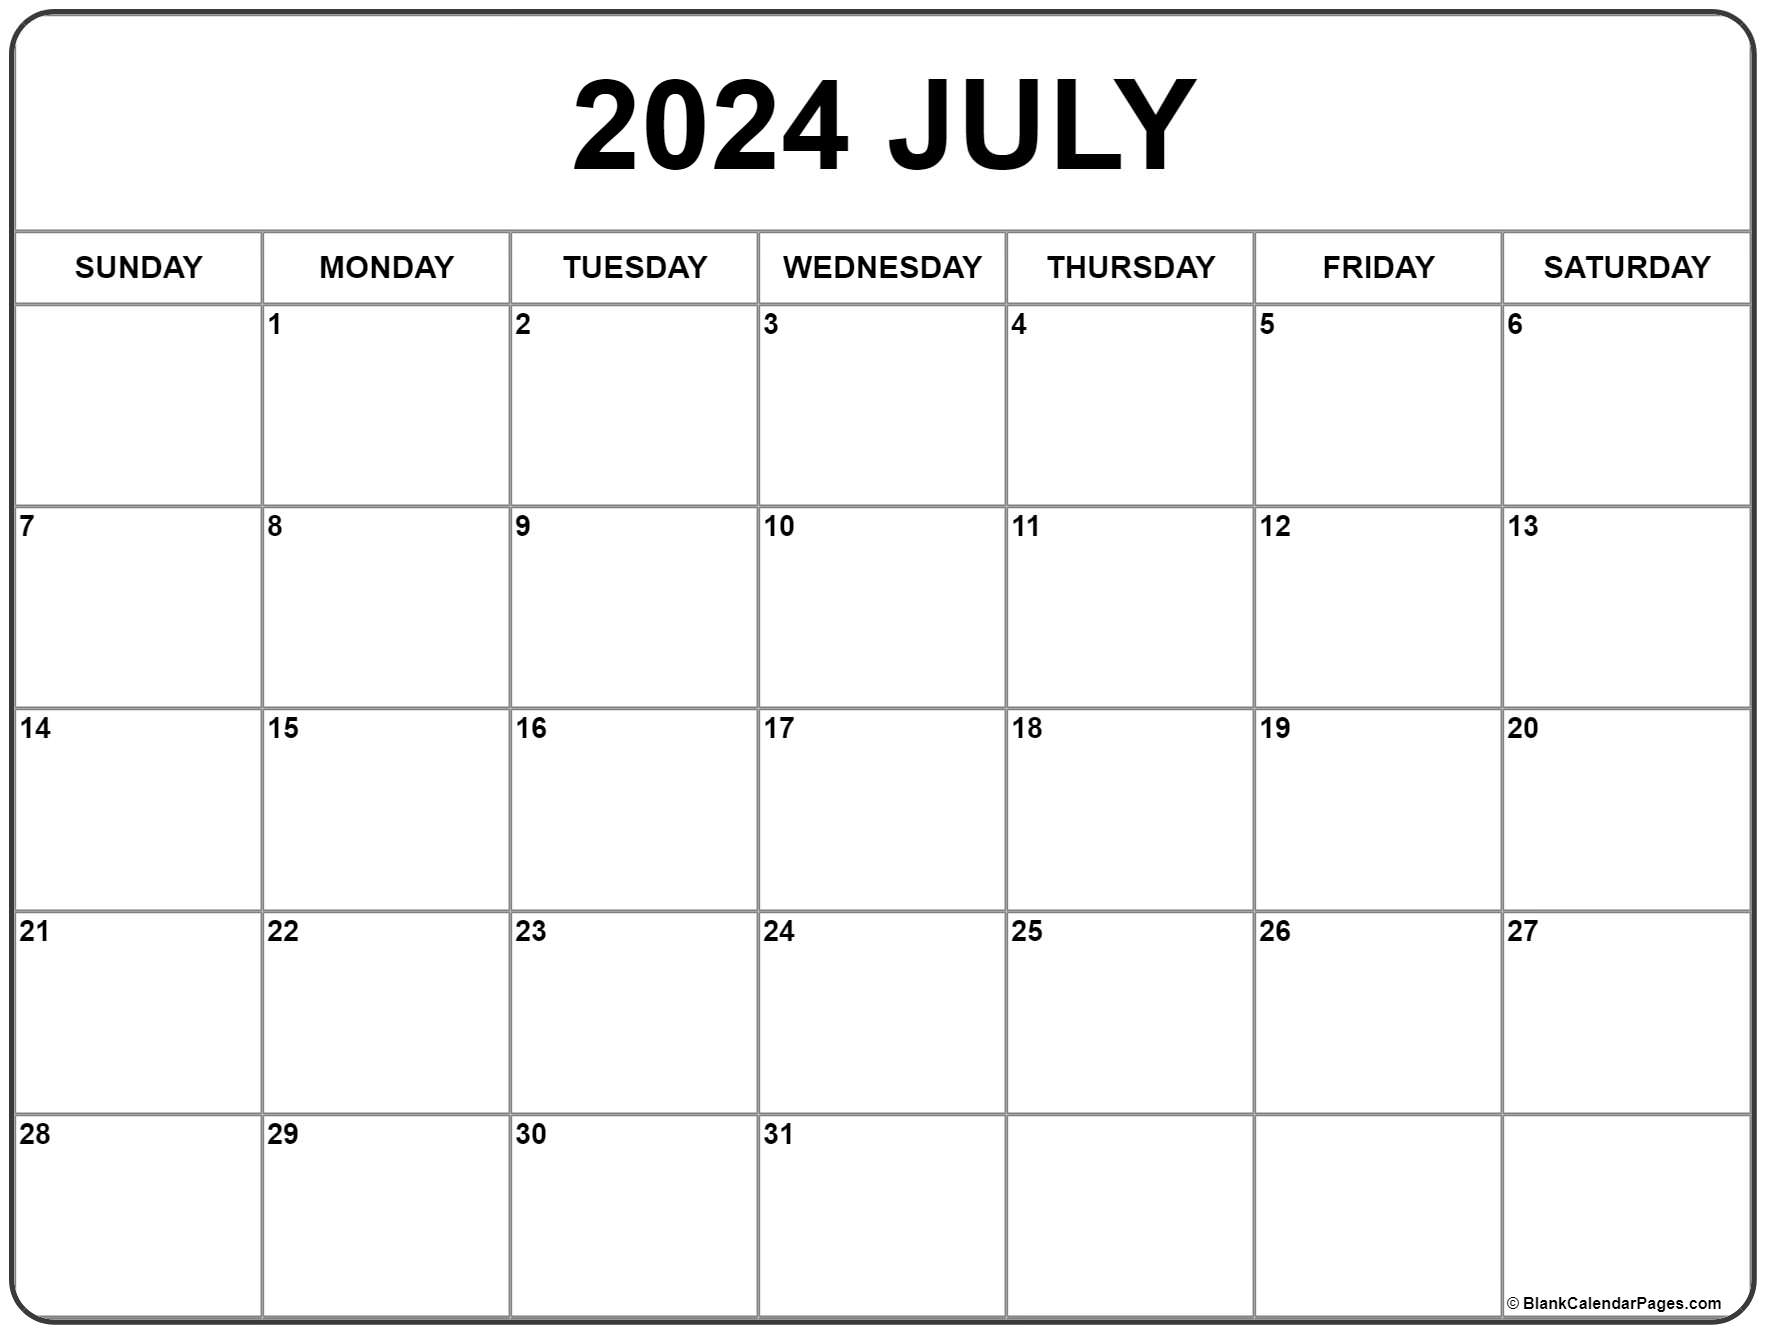 July 2024 Calendar | Free Printable Calendar | Show Me The Calendar For The Month Of July 2024